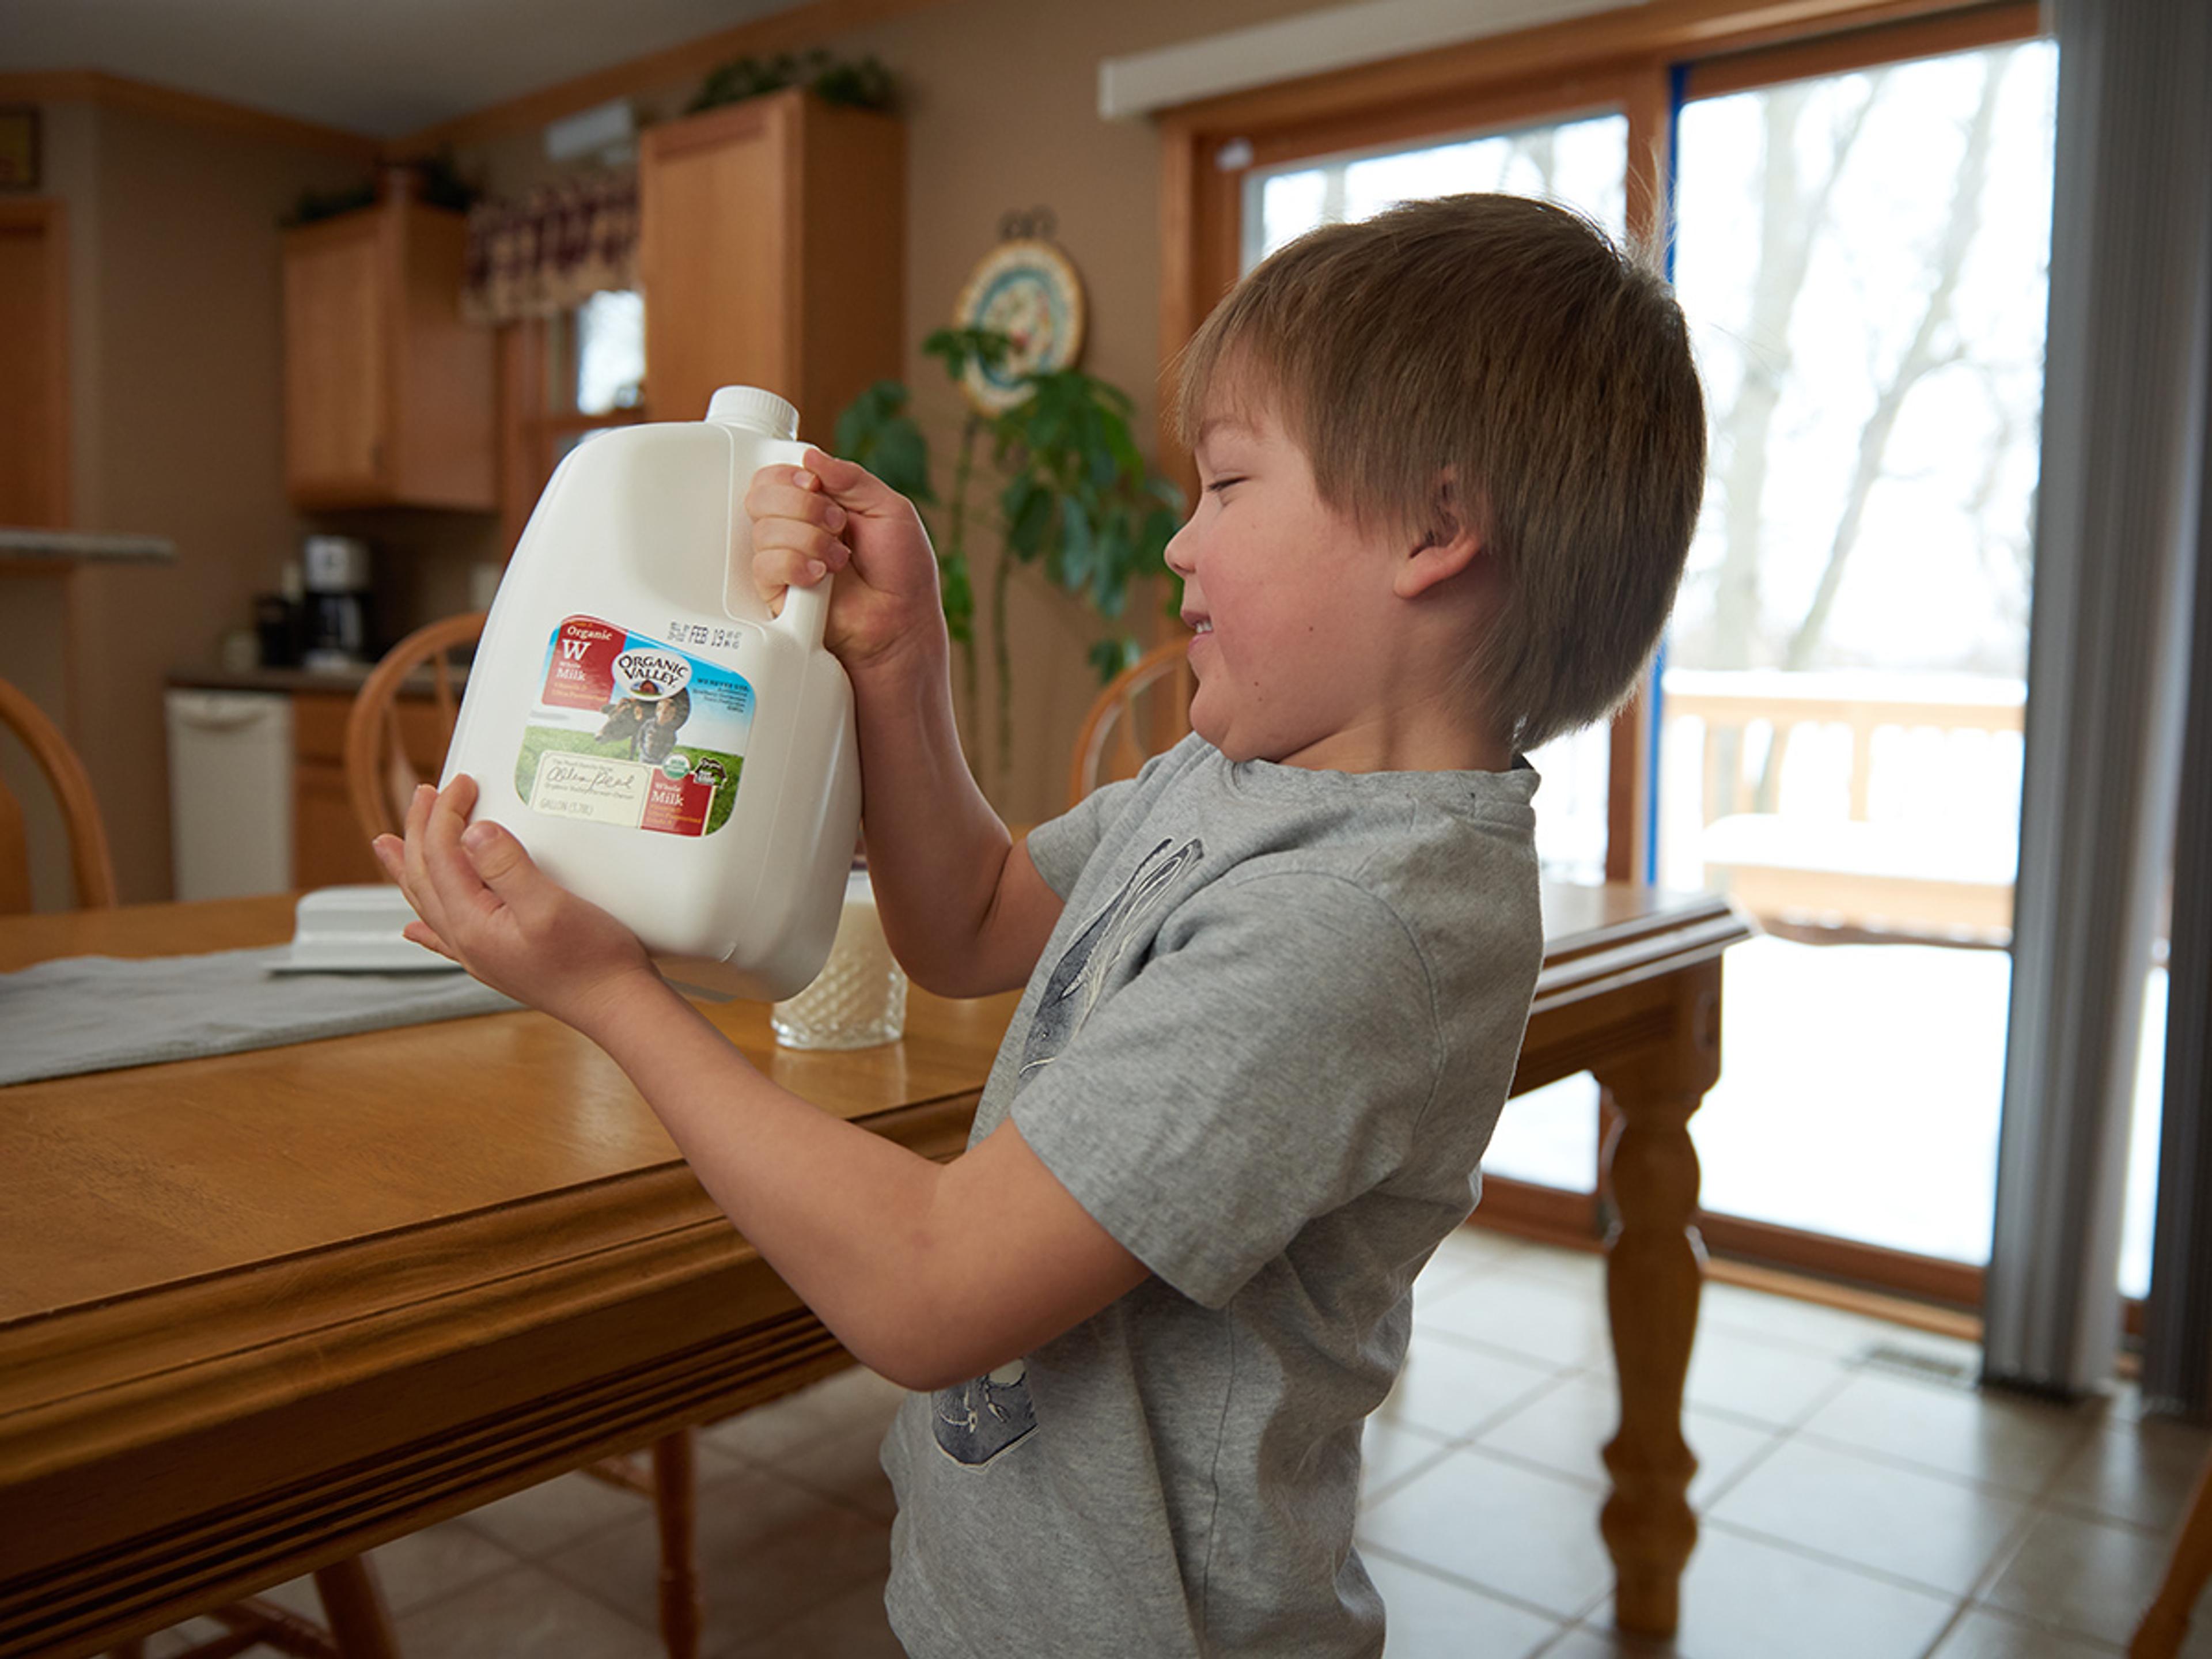 A boy holds a gallon of Organic Valley milk and brings it to the table.